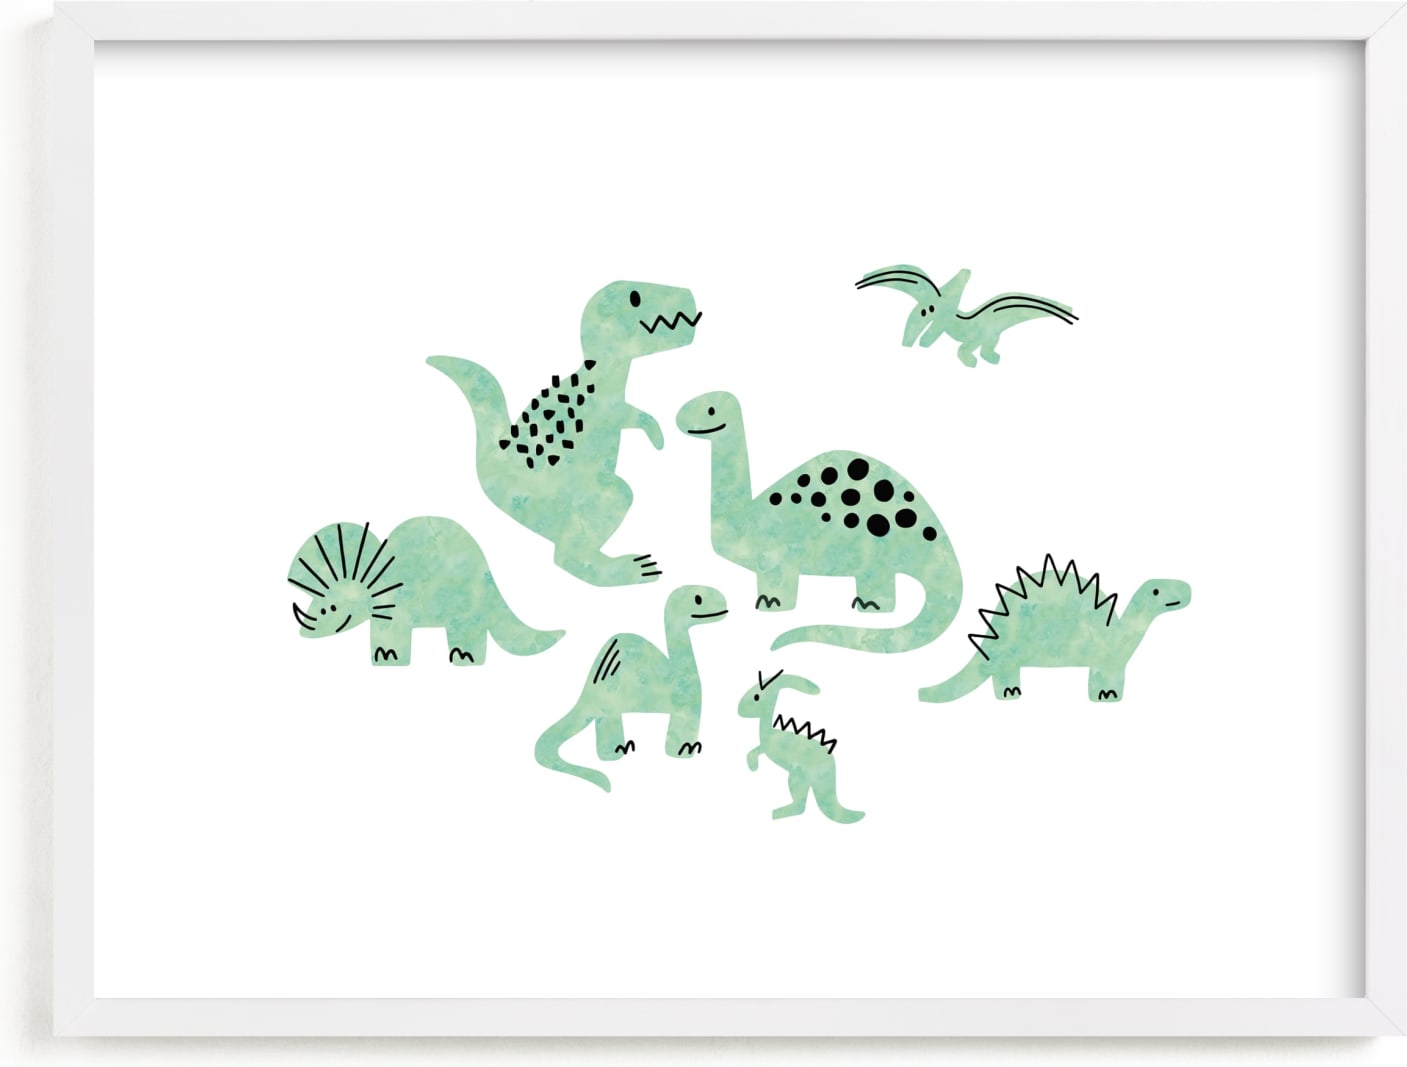 This is a green kids wall art by Jessie Steury called Darling Dinos.